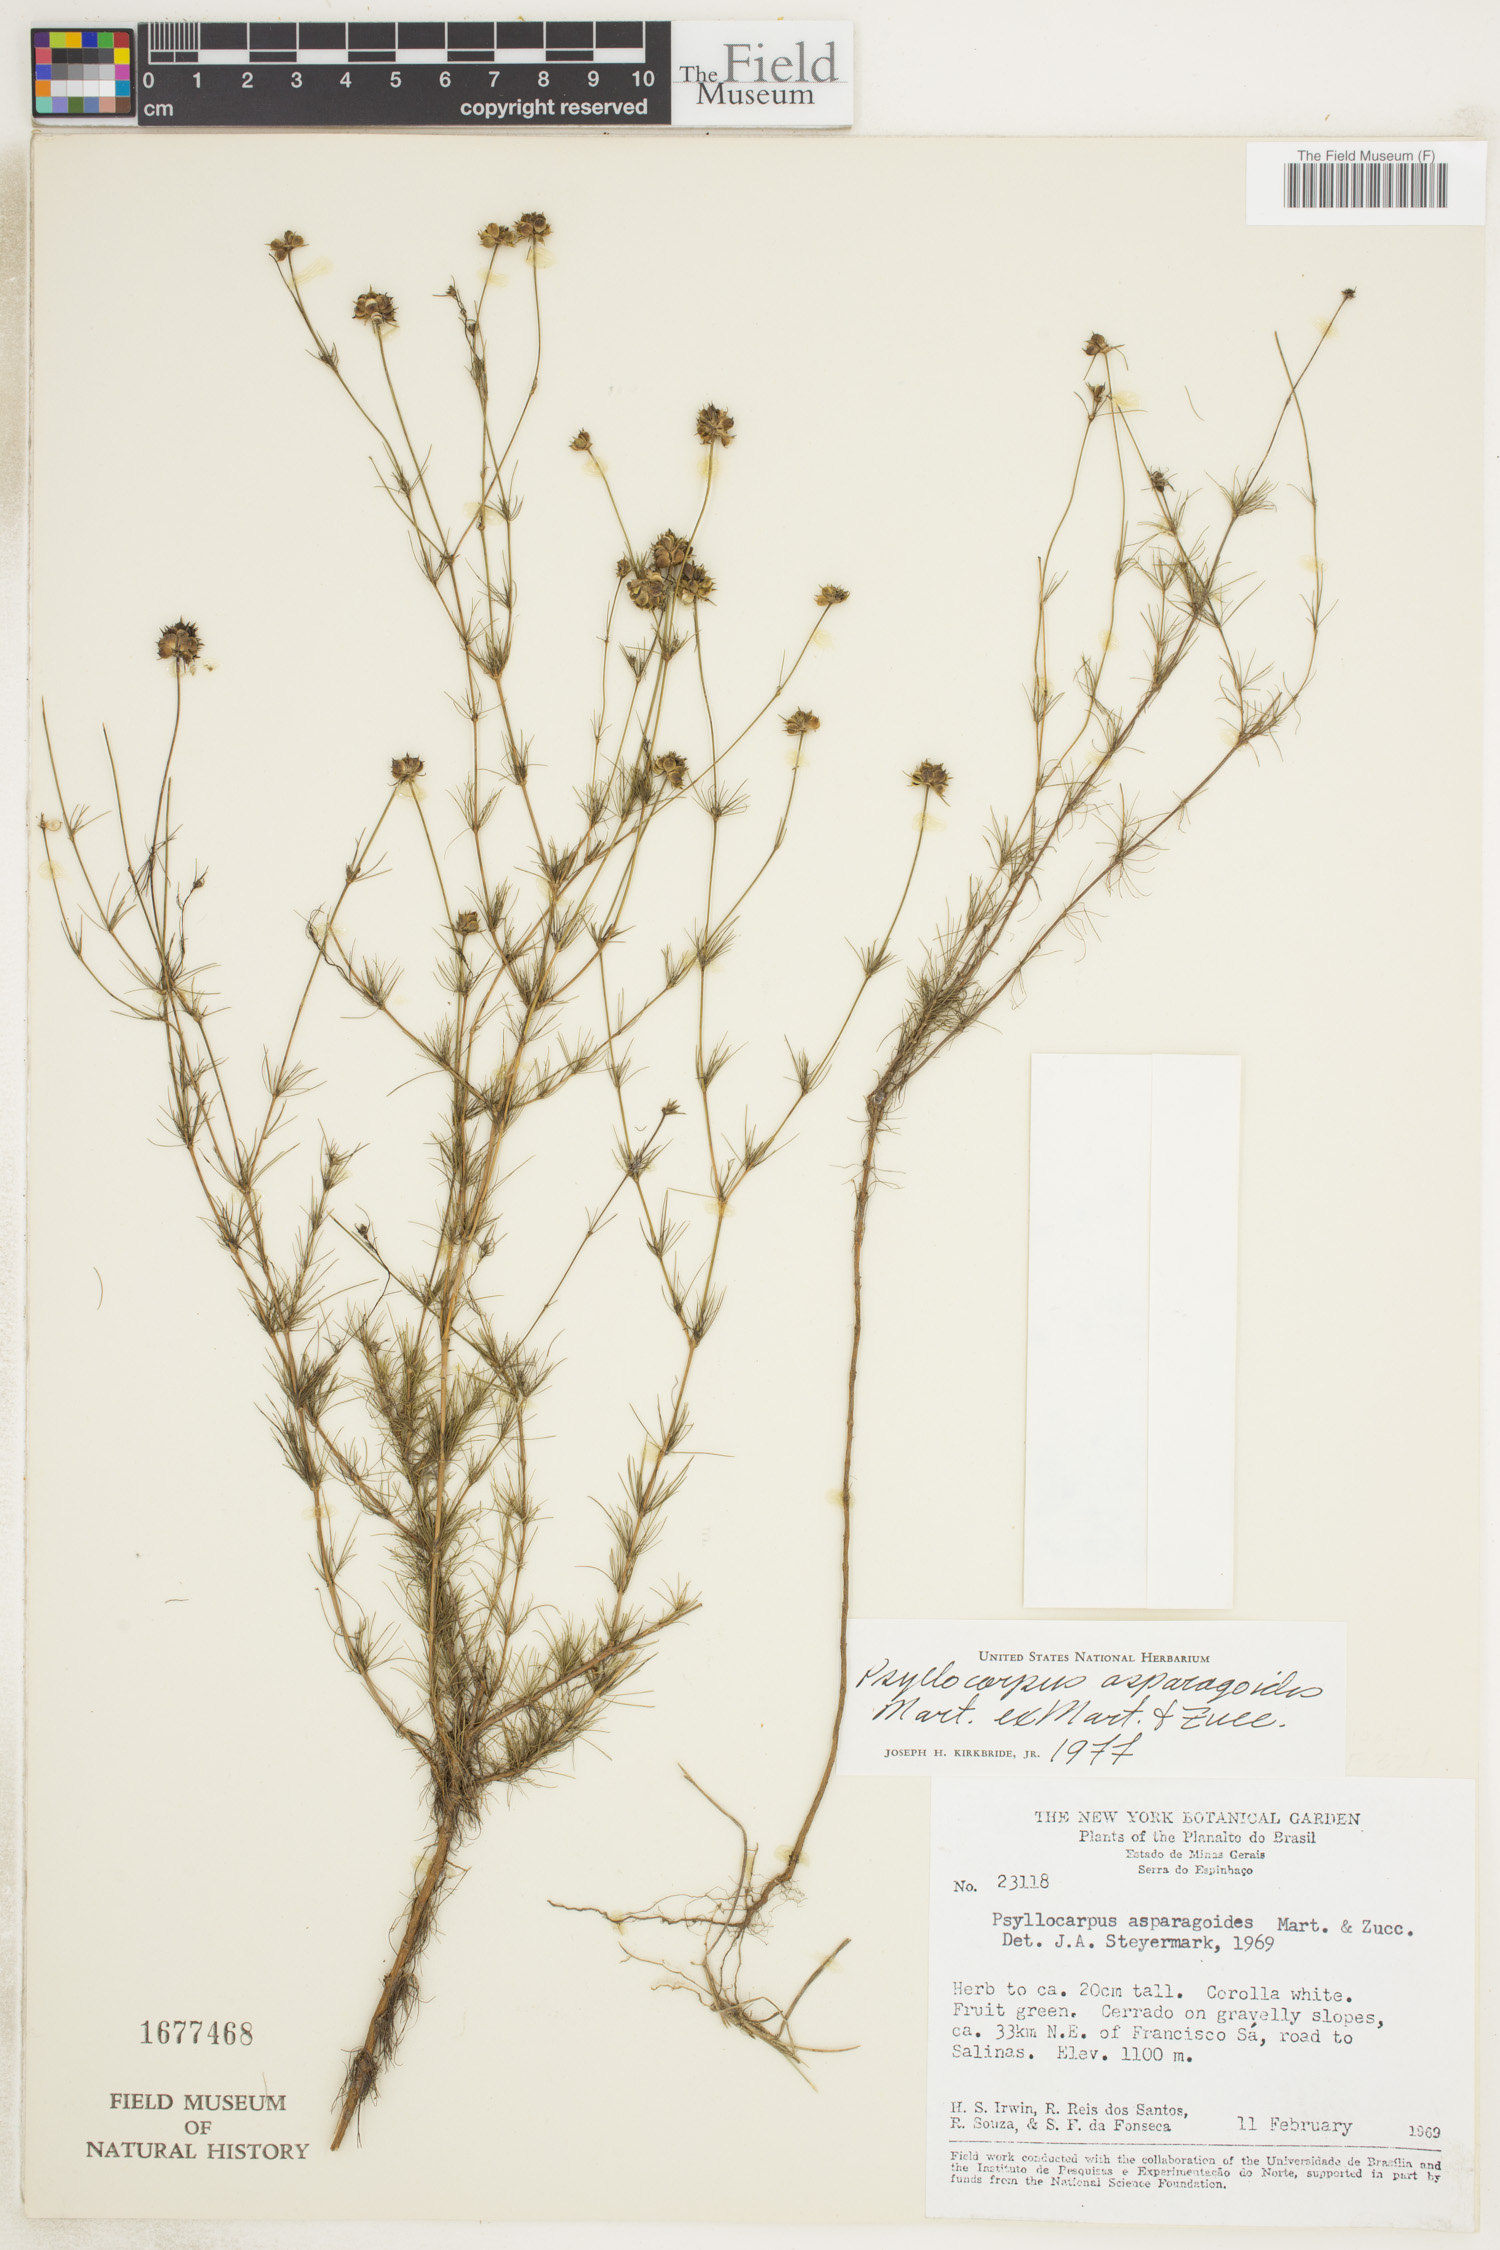 Psyllocarpus asparagoides | Rapid Reference | The Field Museum